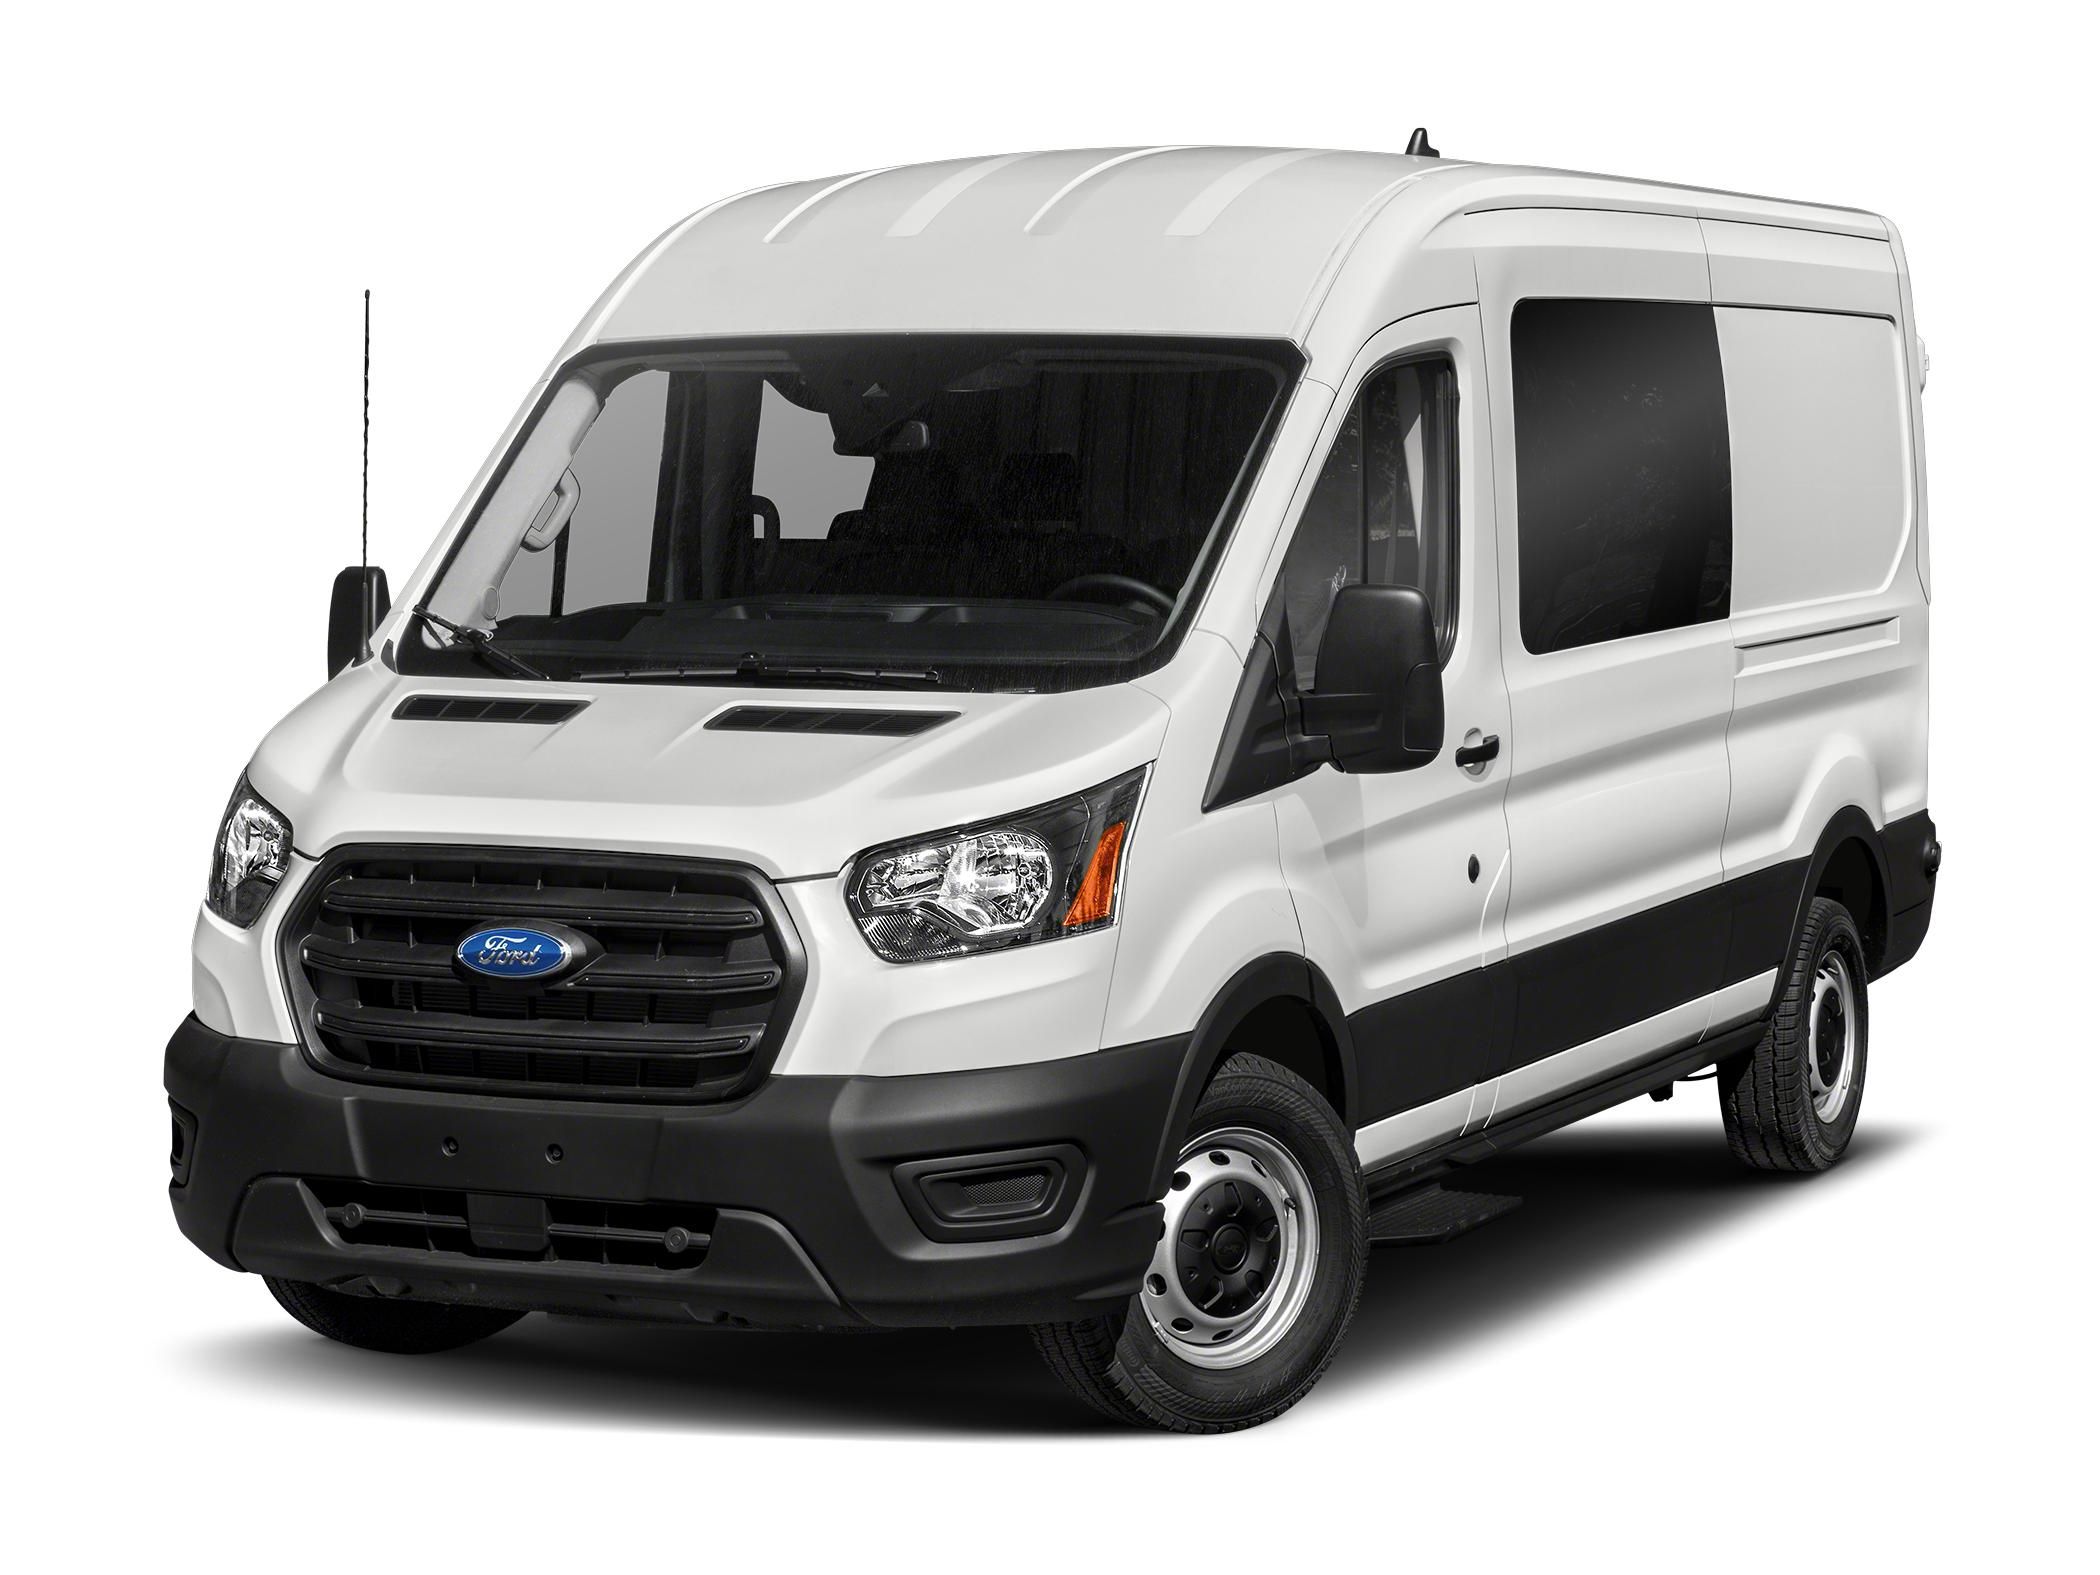 2021 Ford Transit Reviews, Insights, and Specs